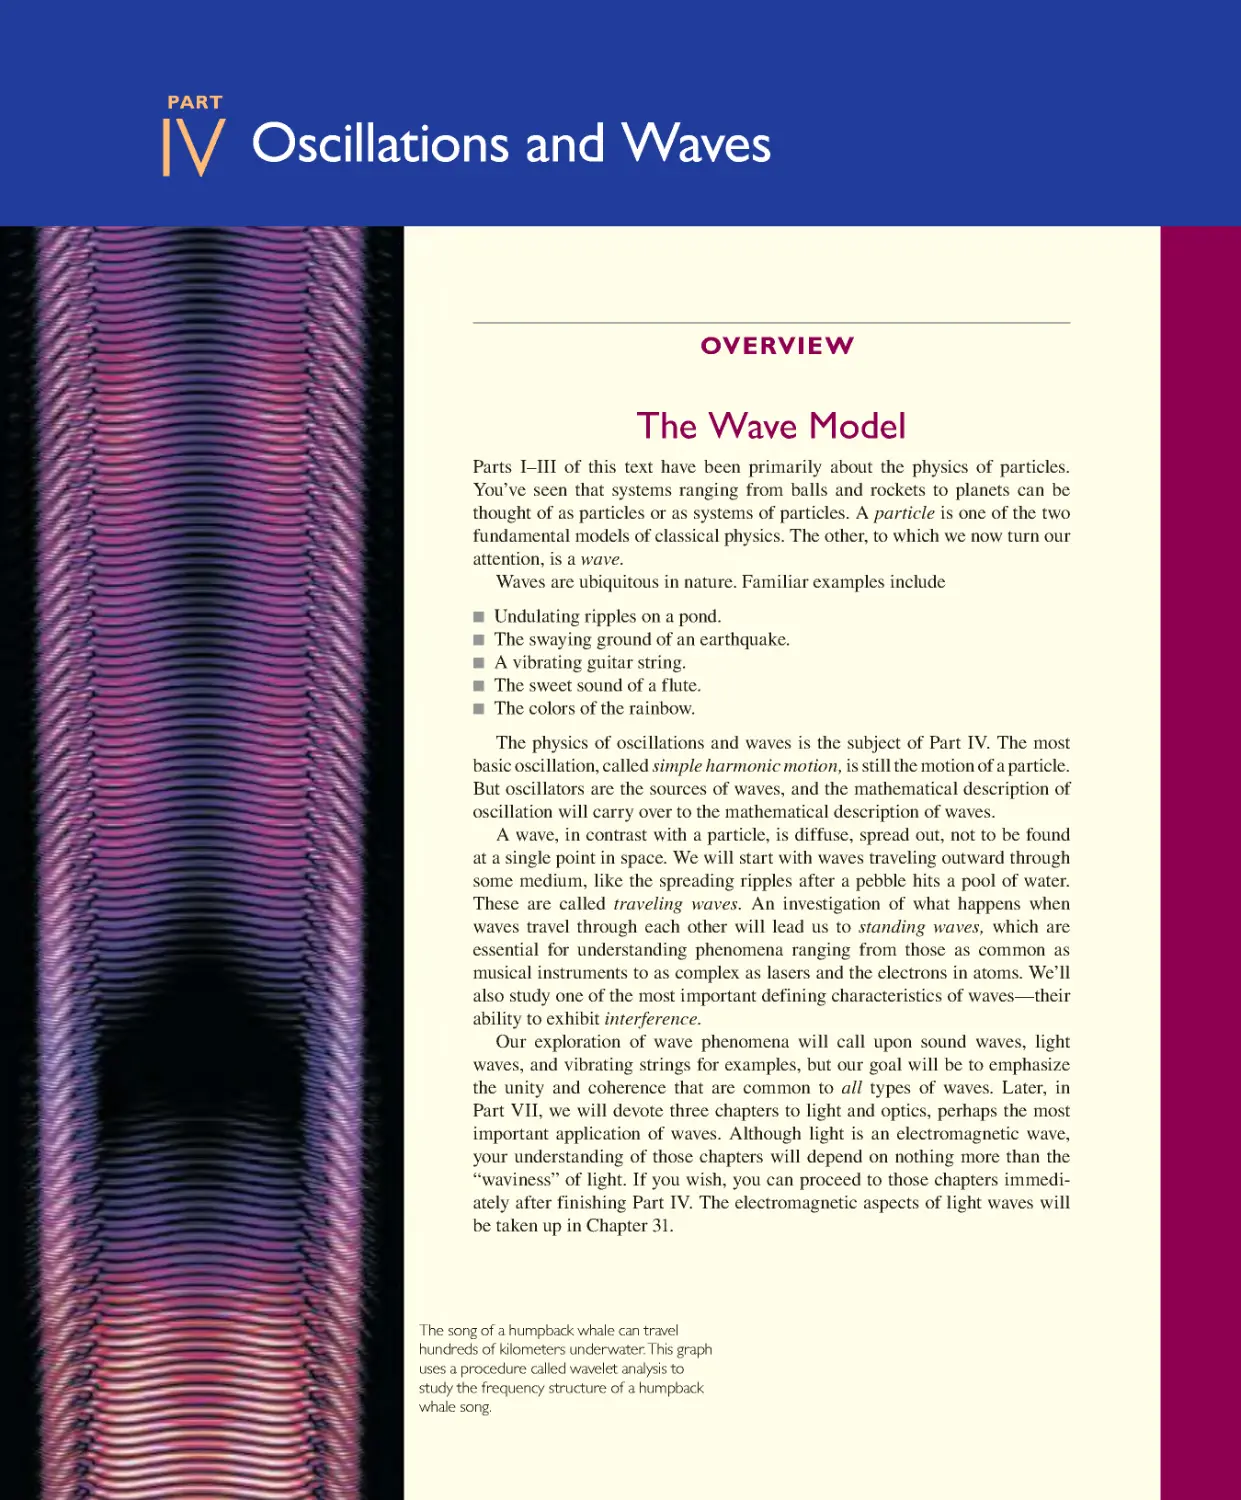 Part IV: Oscillations and Waves: Overview: The Wave Model